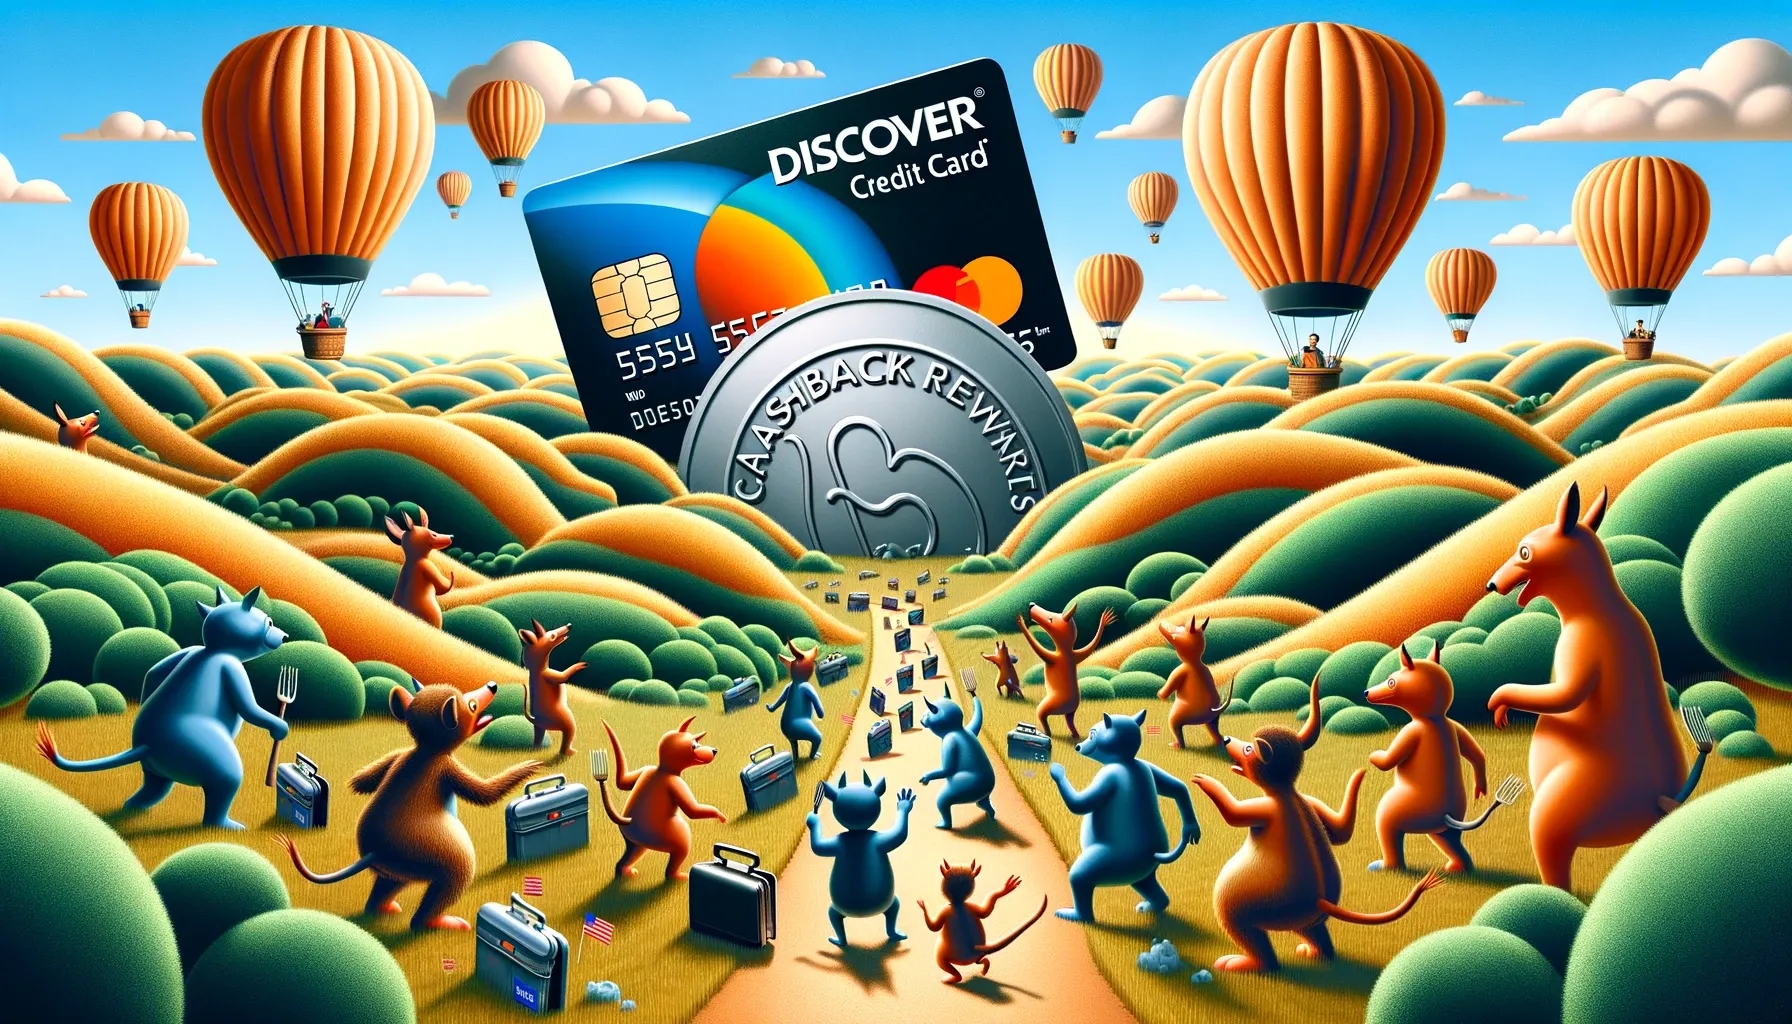 Is Discover Card Really a Joke